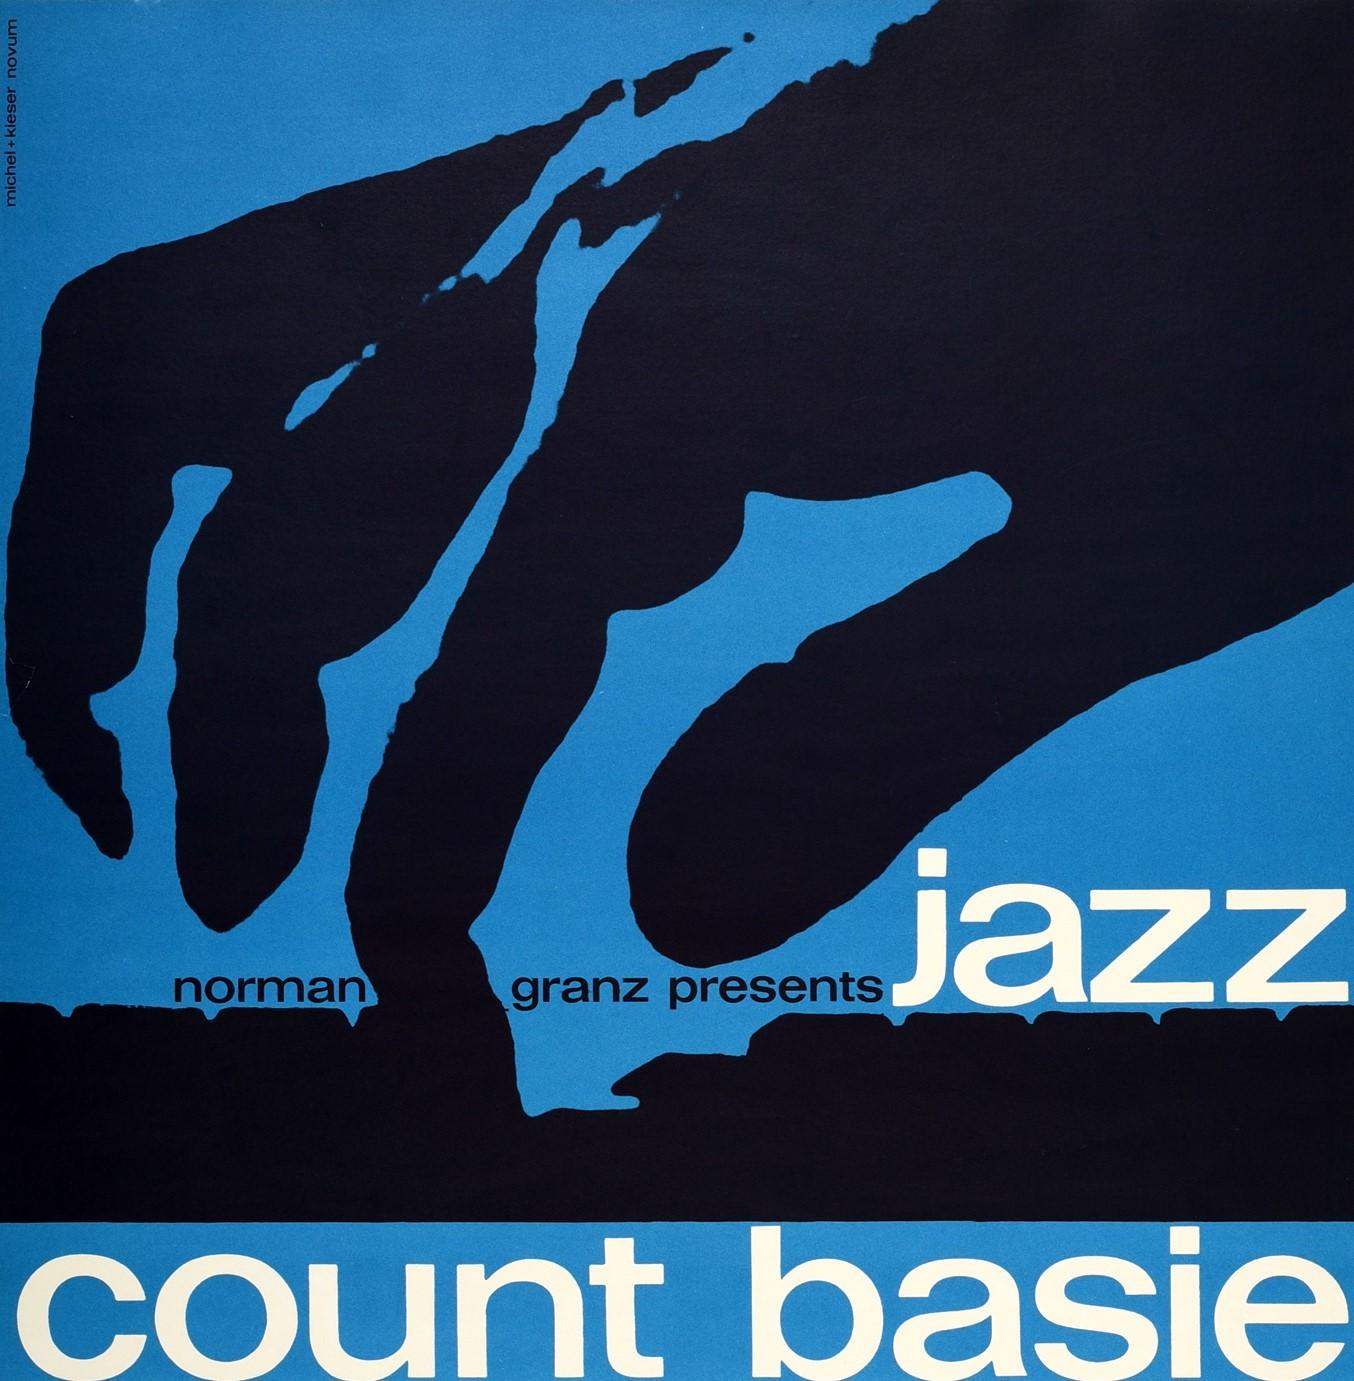 Original vintage poster advertising a music concert event - Norman Granz presents Jazz Count Basie and his orchestra with Joe Williams Miles Davis sextet Oscar Petersen trio Stan Getz quartet Messehalle 8 Koln - featuring a great design with the